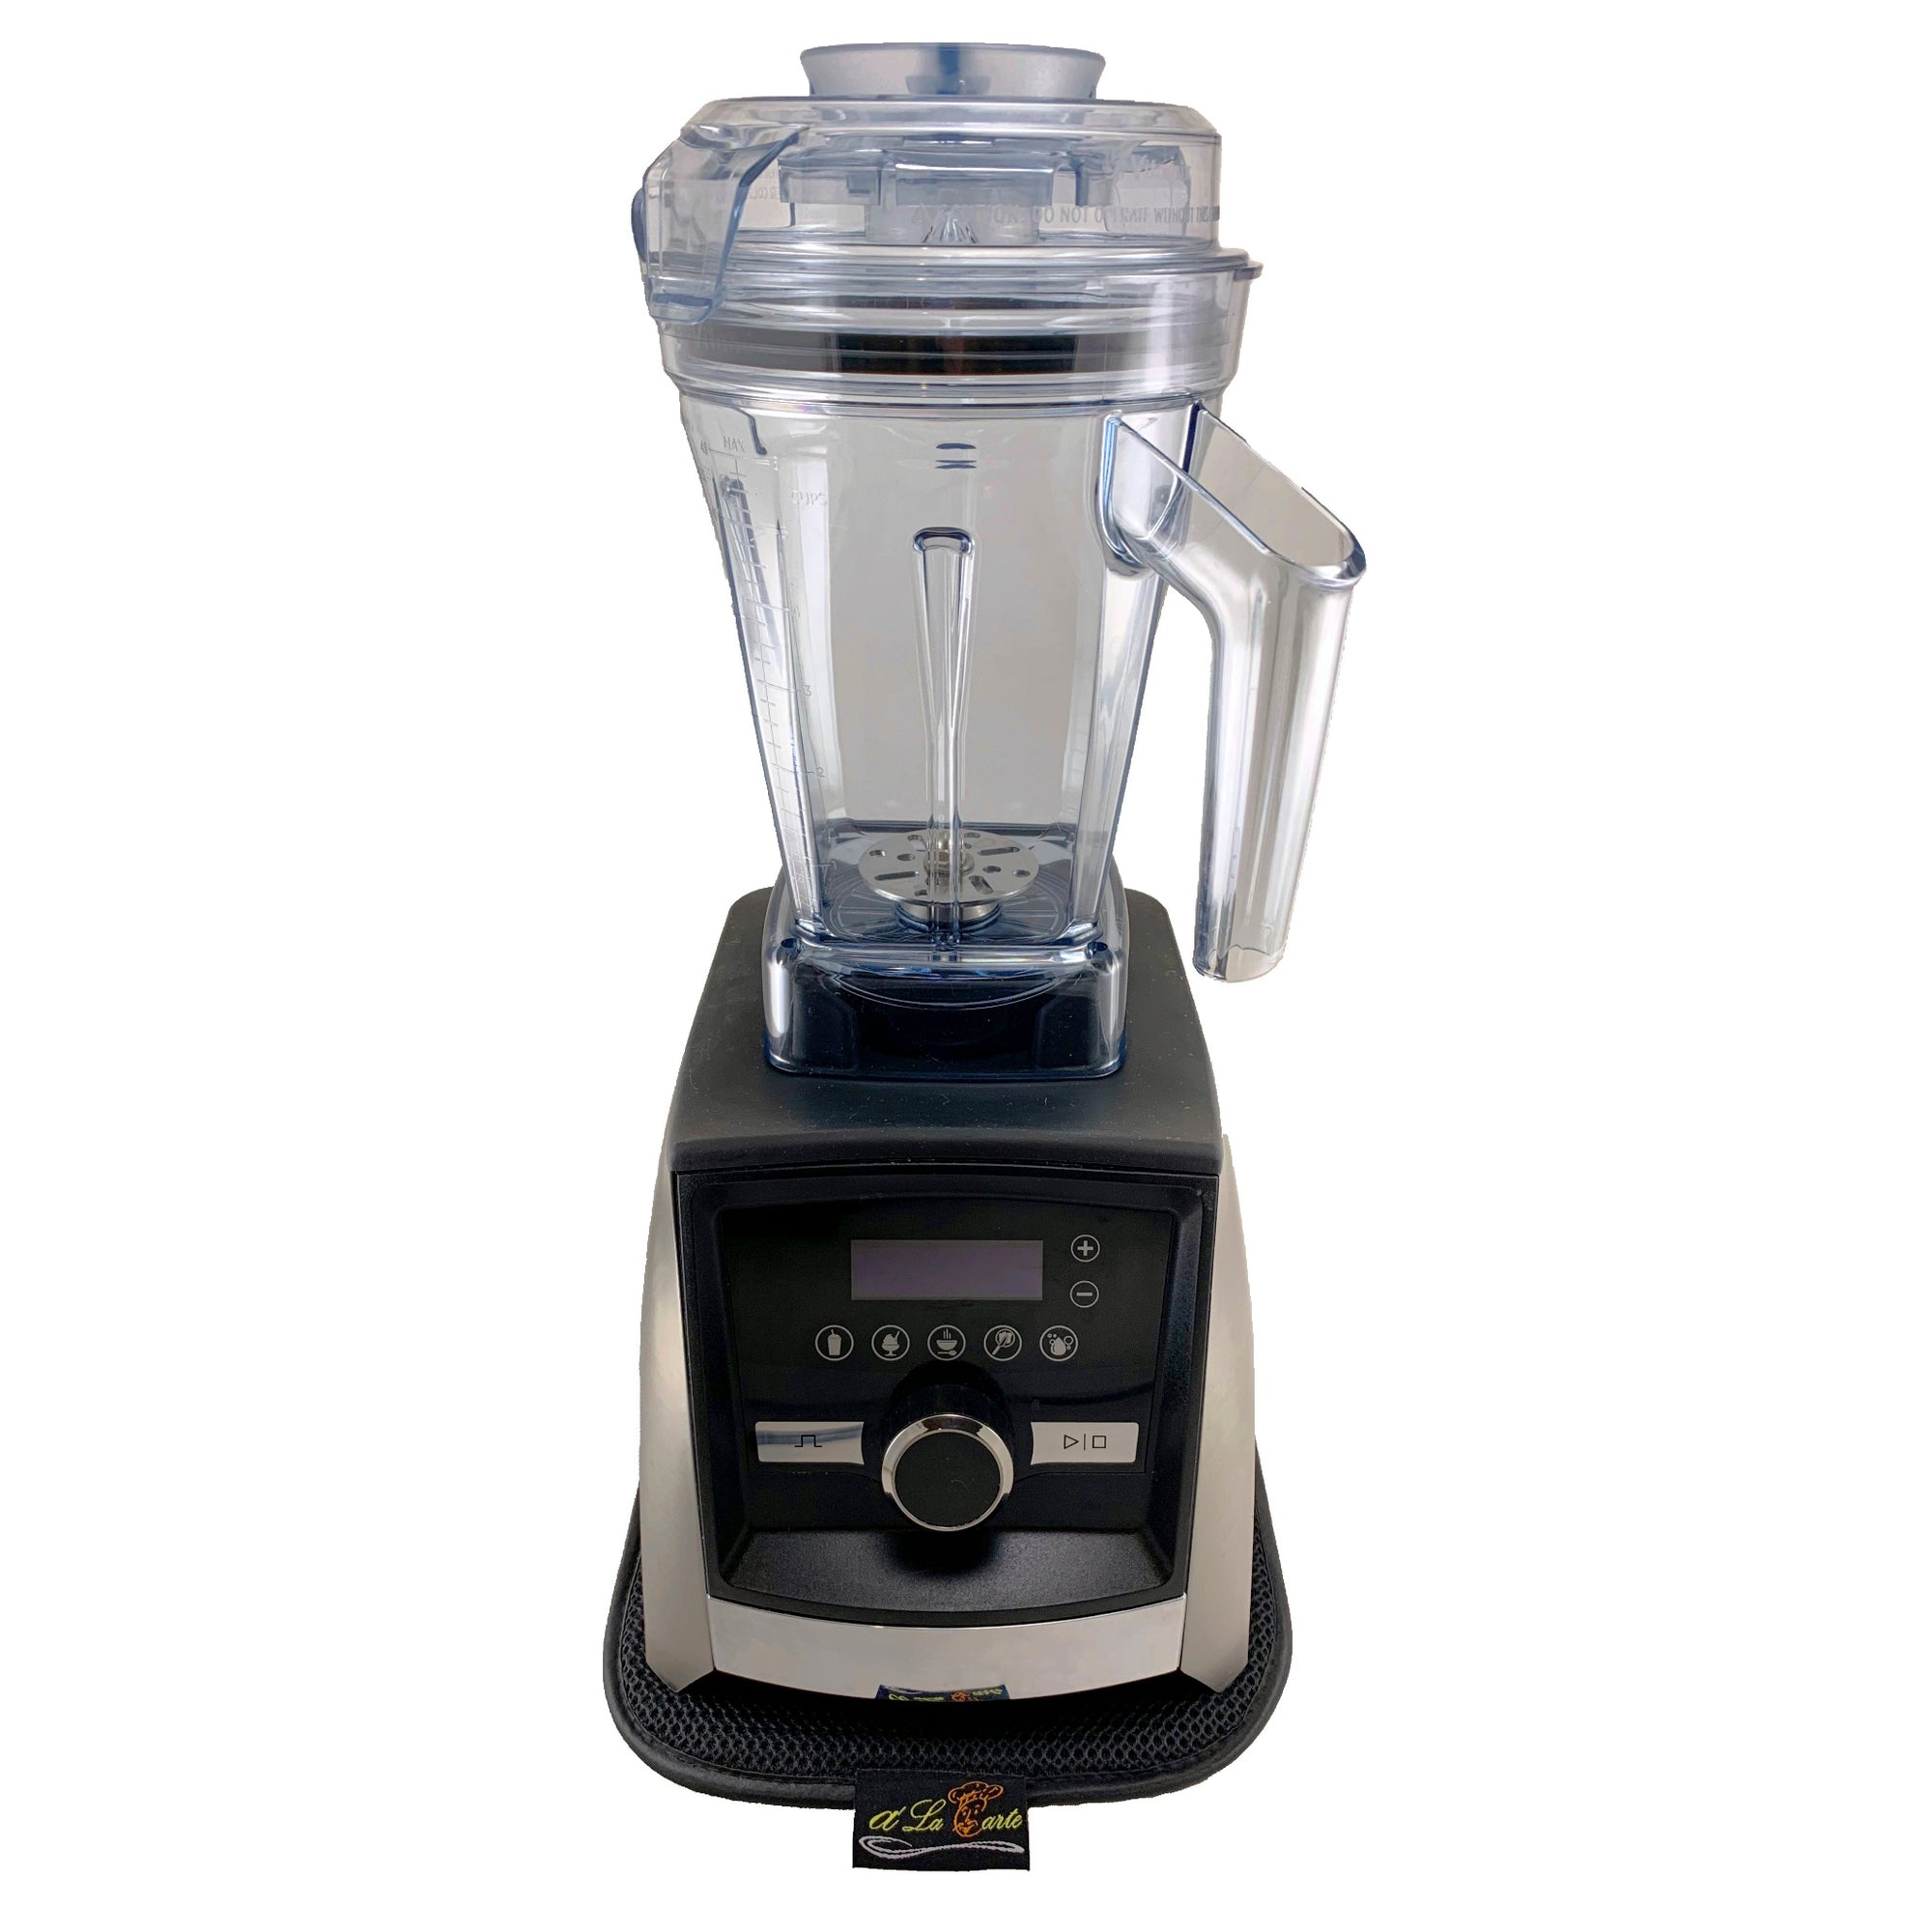 The Best Quiet Blenders You Can Buy 